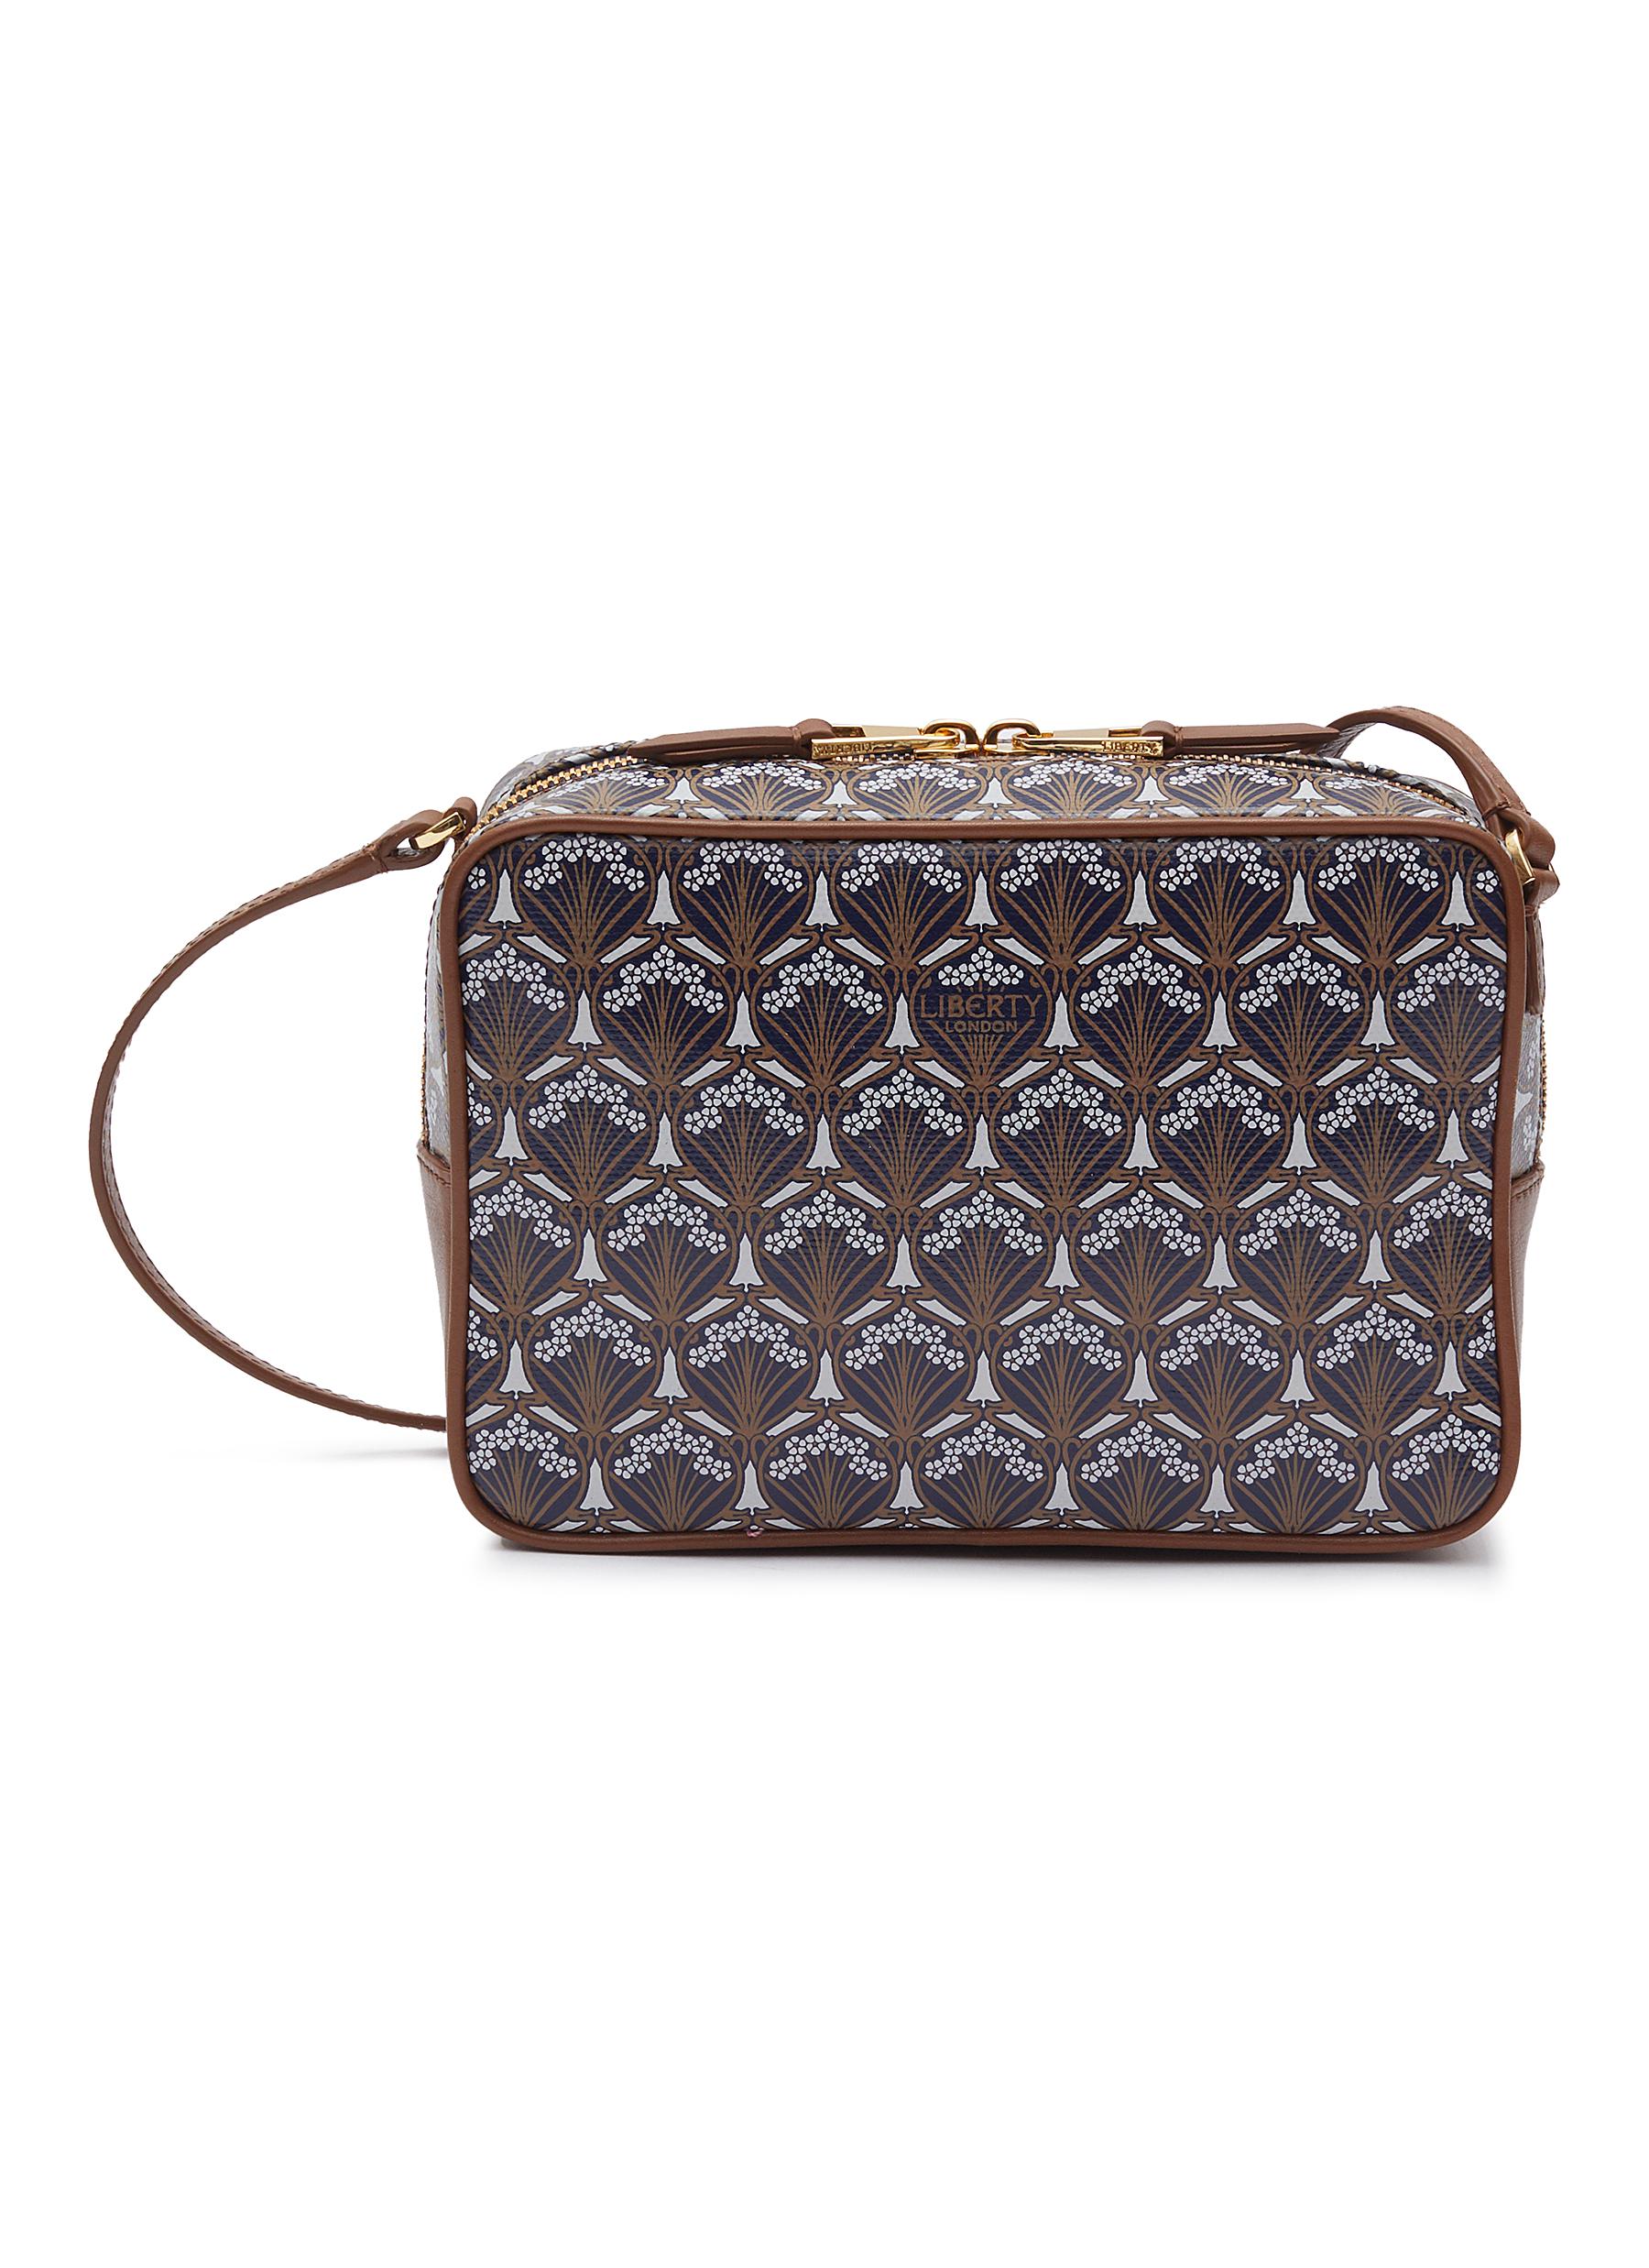 Liberty London 'iphis Maddox' Printed Crossbody Leather Bag In Brown